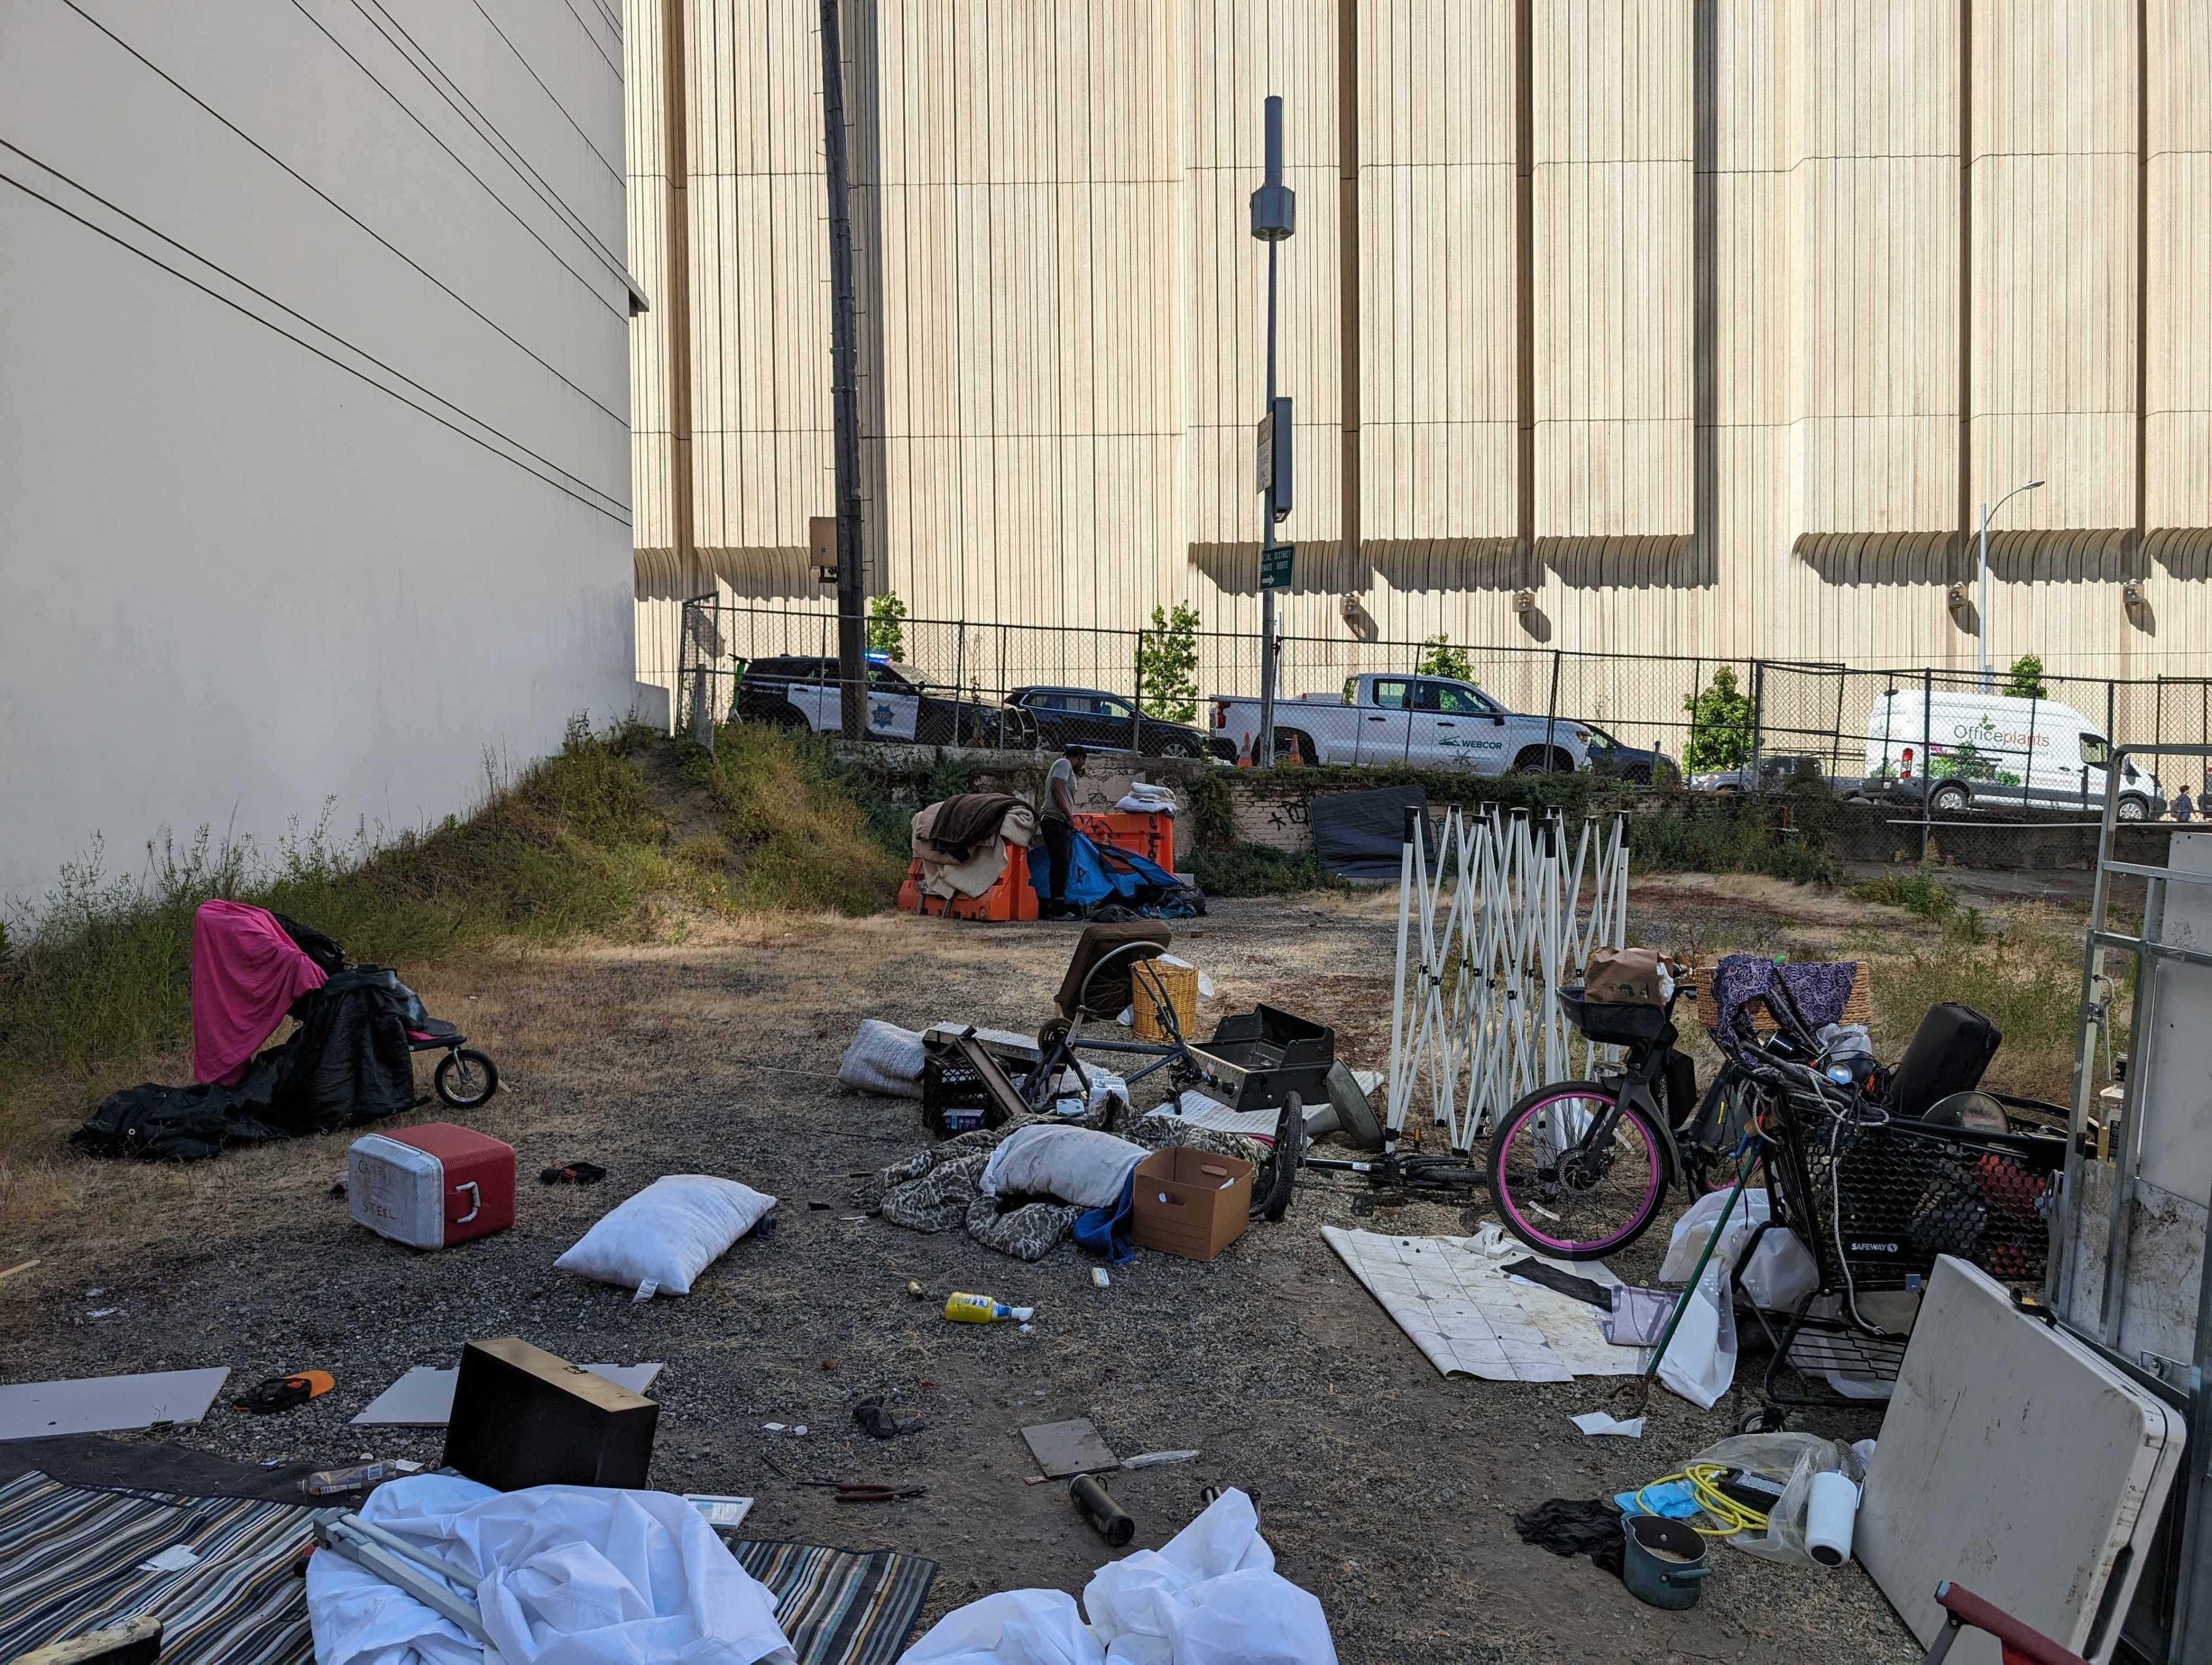 The image shows an outdoor area with scattered belongings including a tricycle, a cooler, pillows, a bike, and various items on the ground, suggesting a makeshift living space.